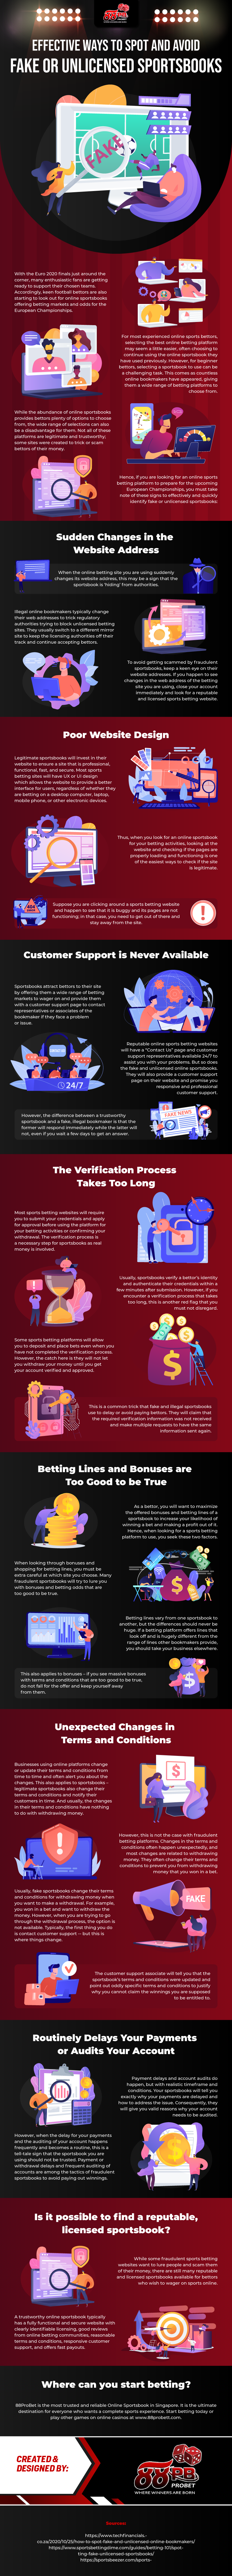 Effective-Ways-To-Spot-and-Avoid-Fake-or-Unlicensed-Sportsbooks-Infographic